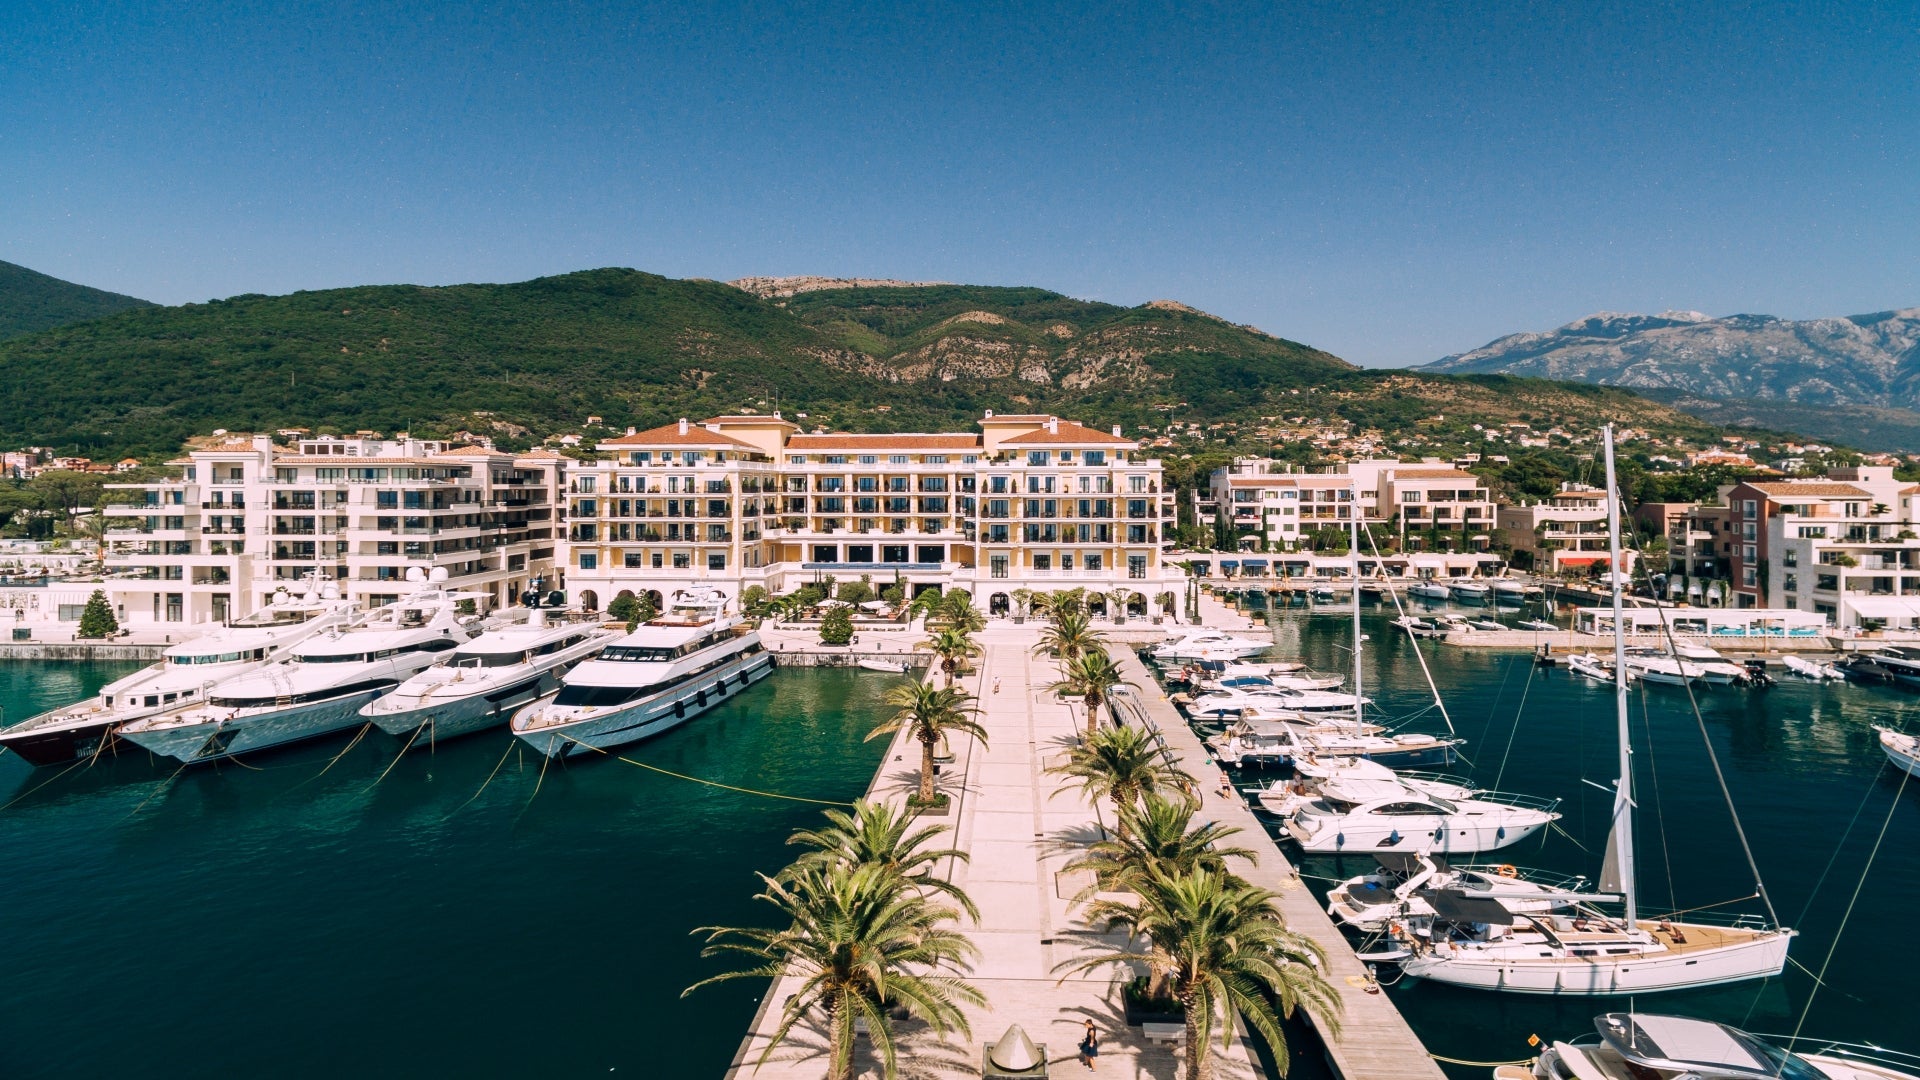 pier-leads-to-a-luxurious-expensive-hotel-in-the-water-tivat-porto-montenegro-travel-trip-tour-excursion